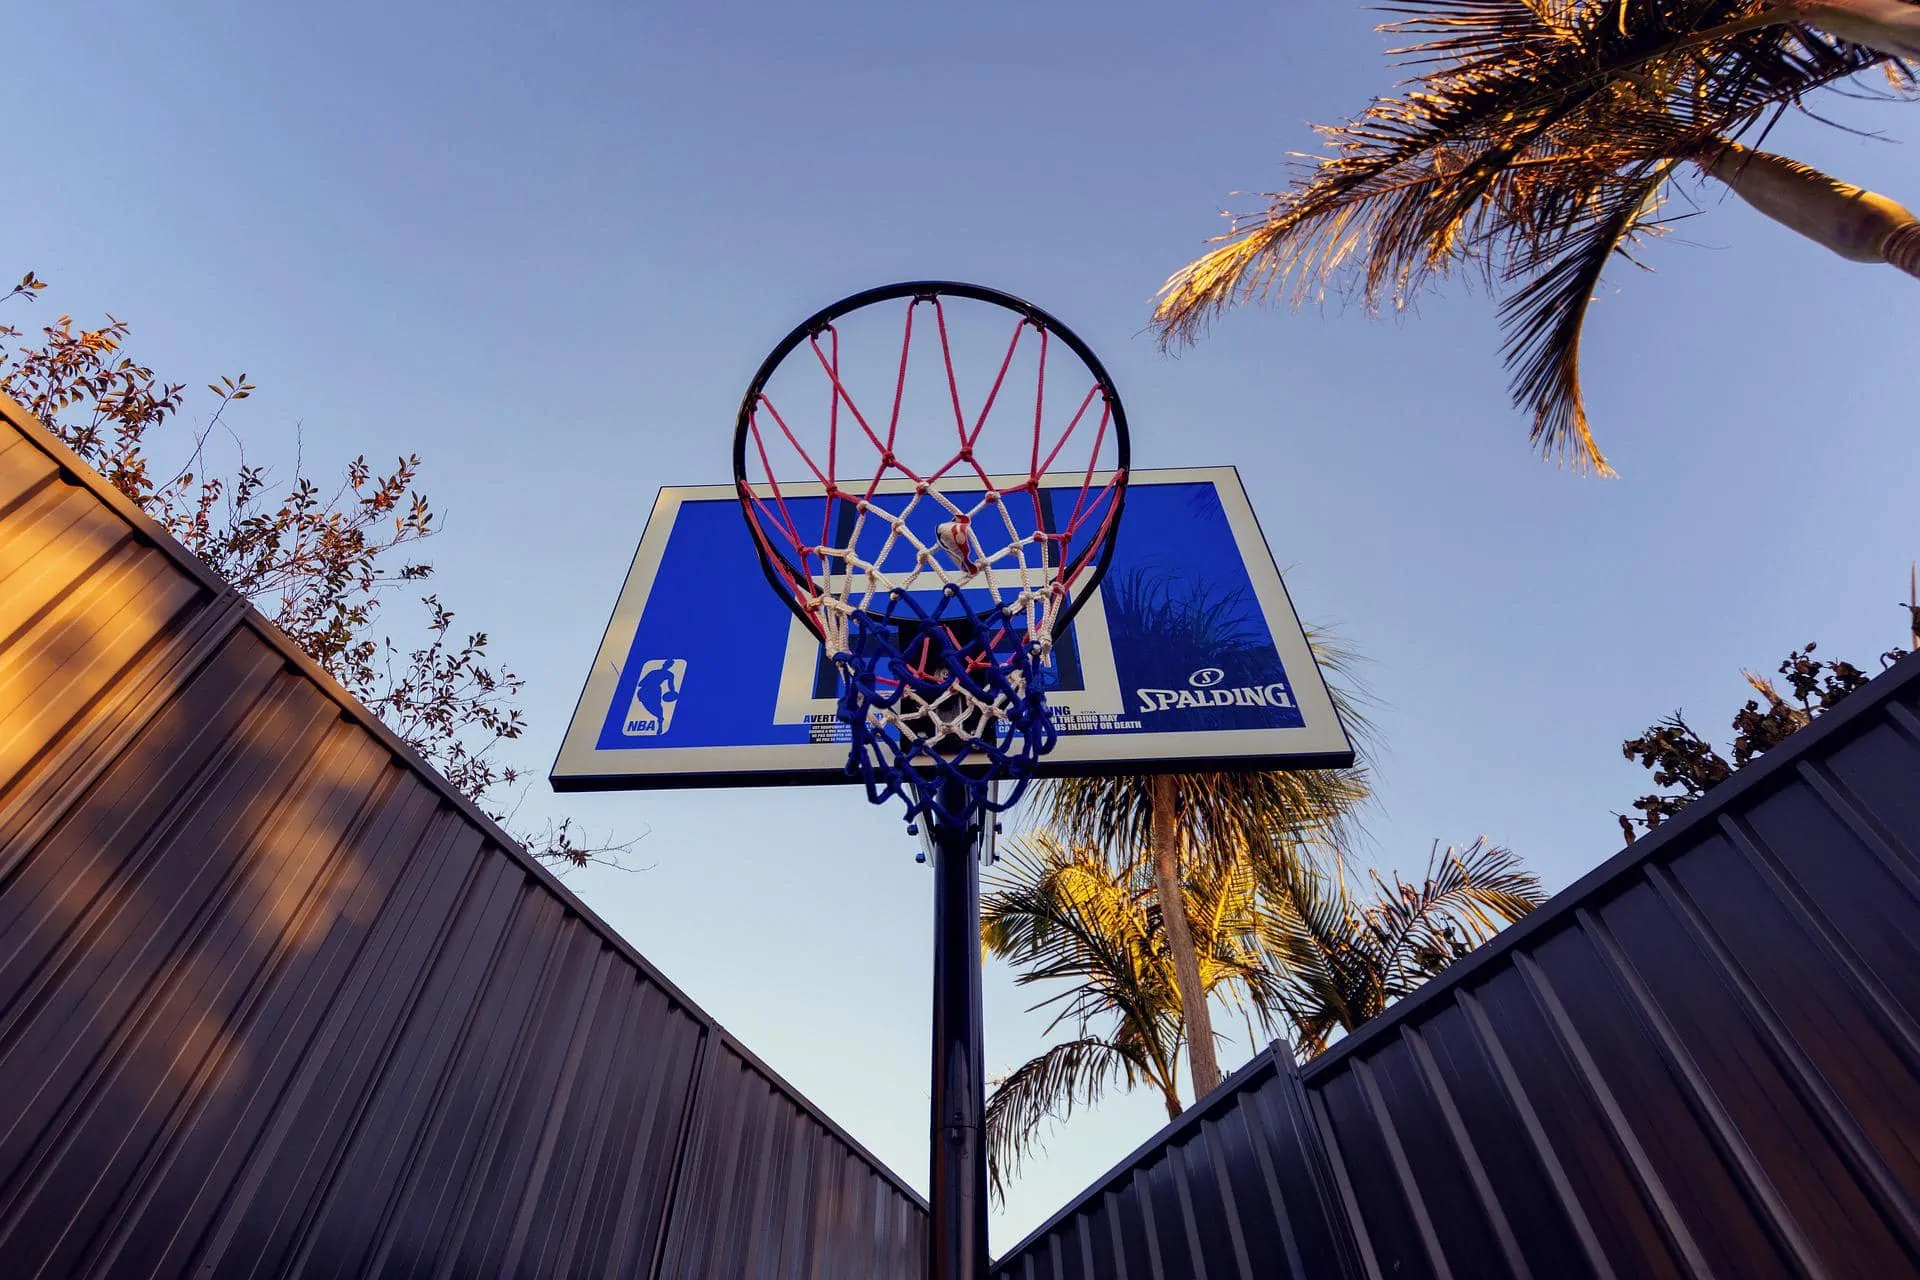 5 Factors that Determine the Price of a Basketball Hoop